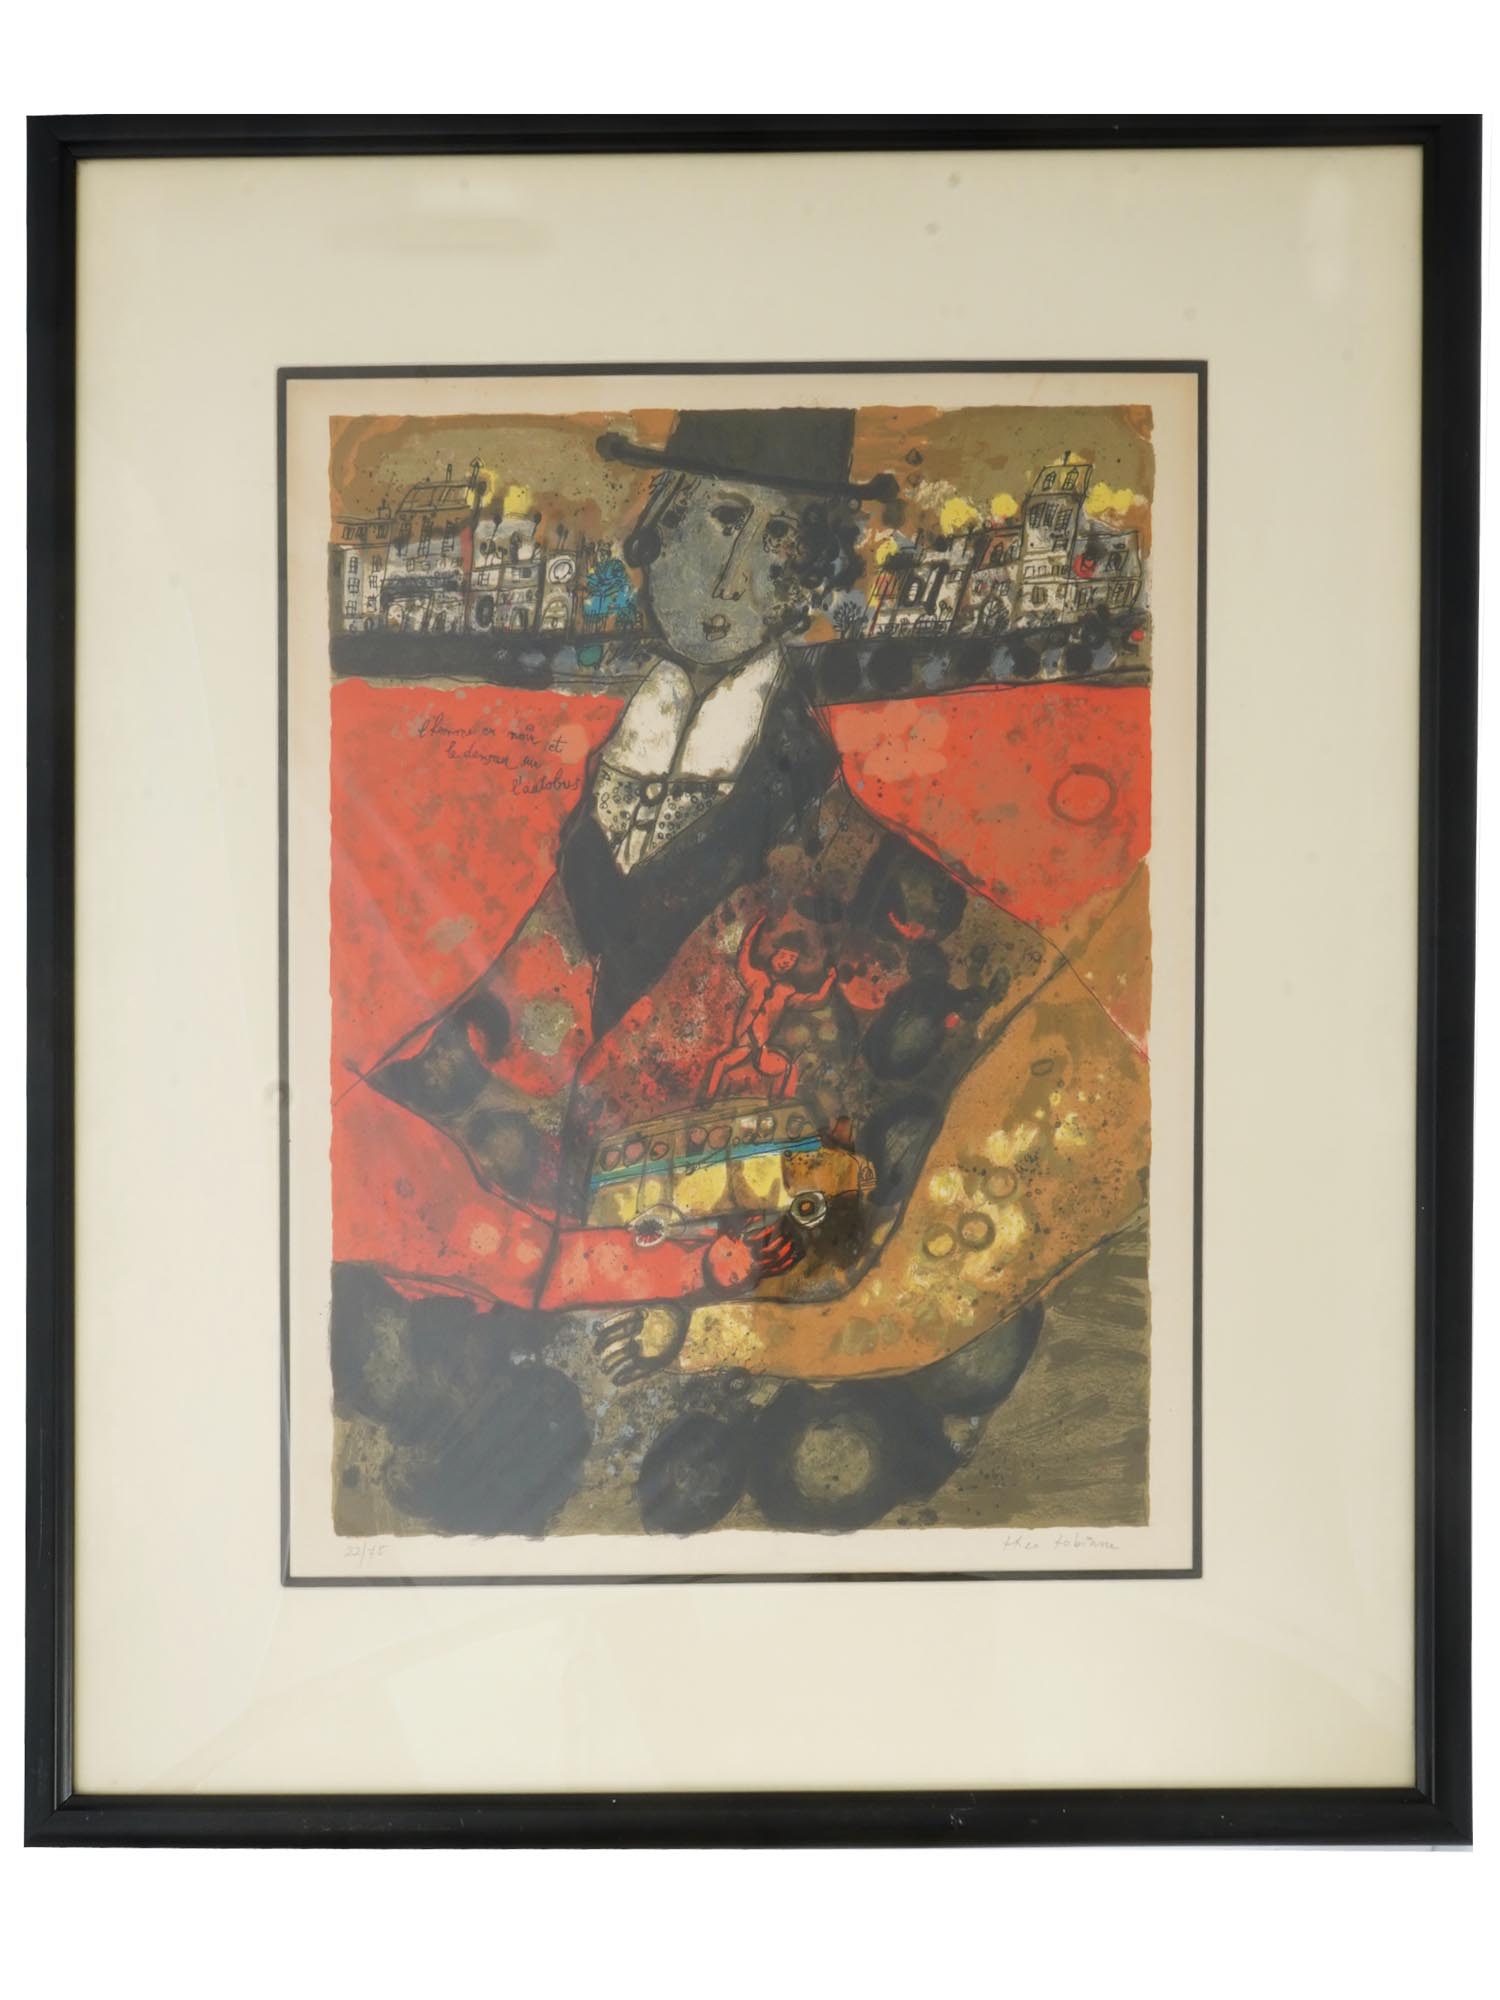 LITHOGRAPH PRINT MAN IN BLACK BY THEO TOBIASSE PIC-0